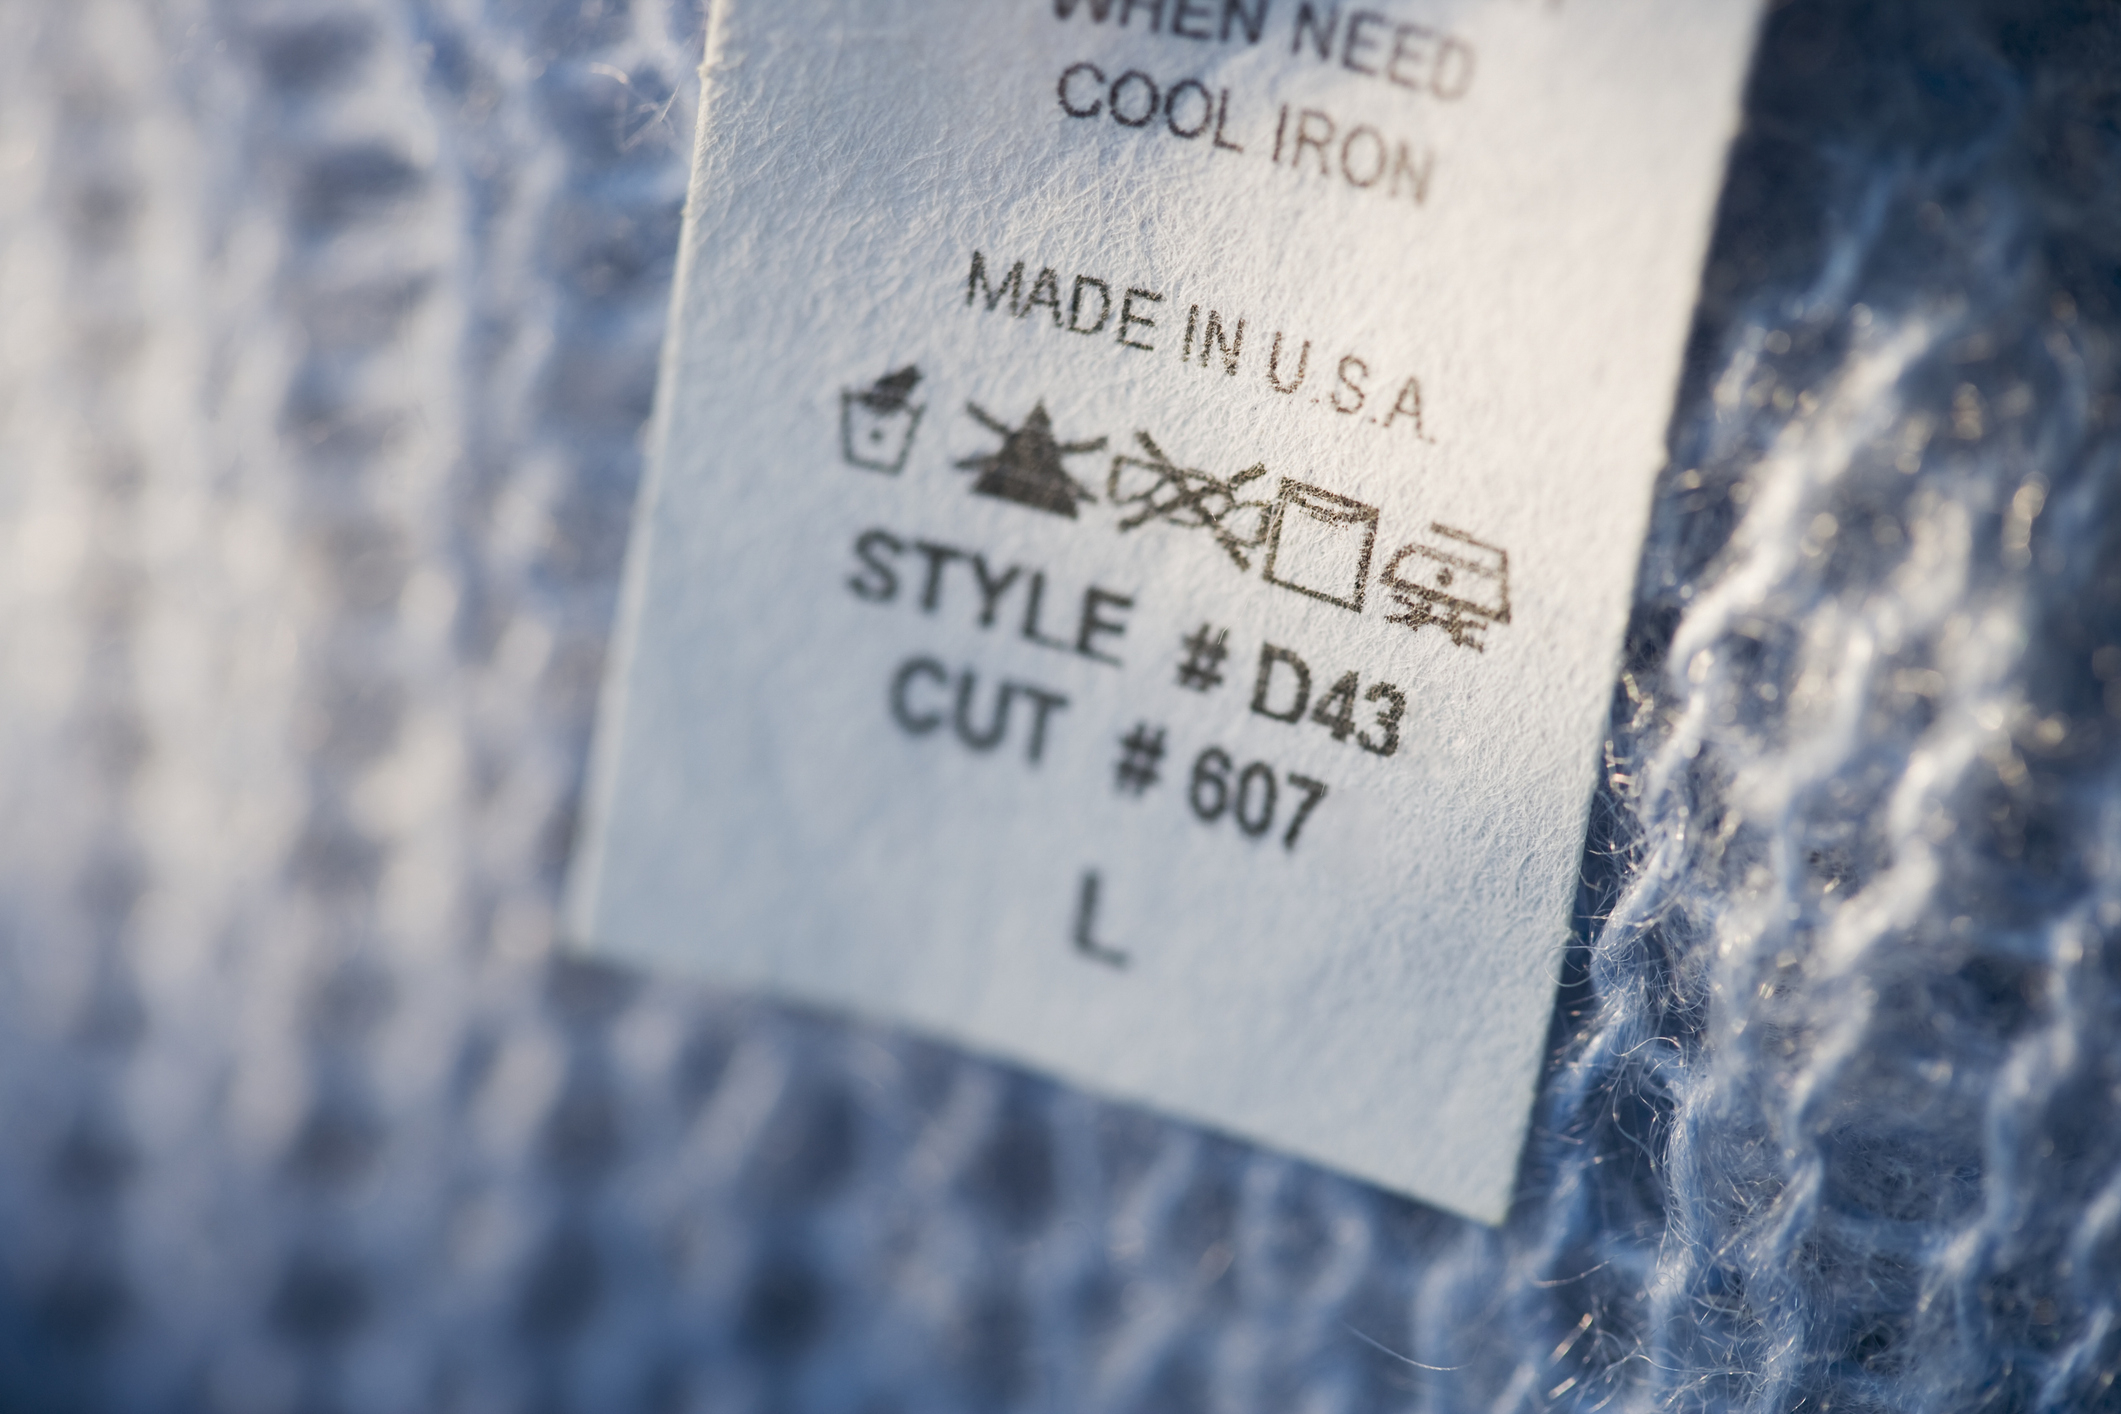 Care label on clothing with washing instructions and size L